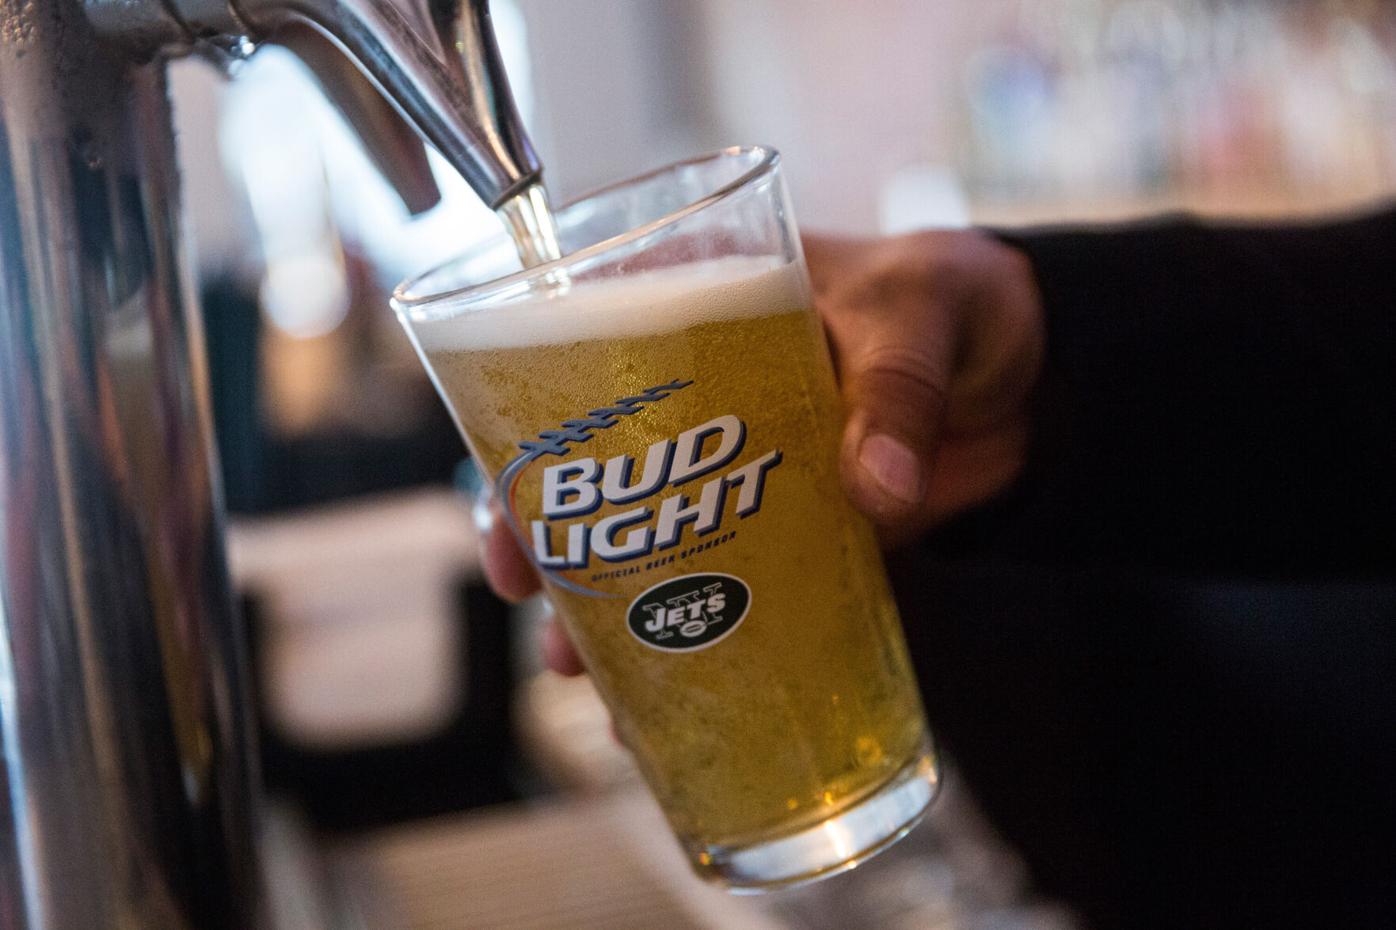 For the first time since 1989, the Super Bowl will feature alcohol ads not  made by Anheuser-Busch, News